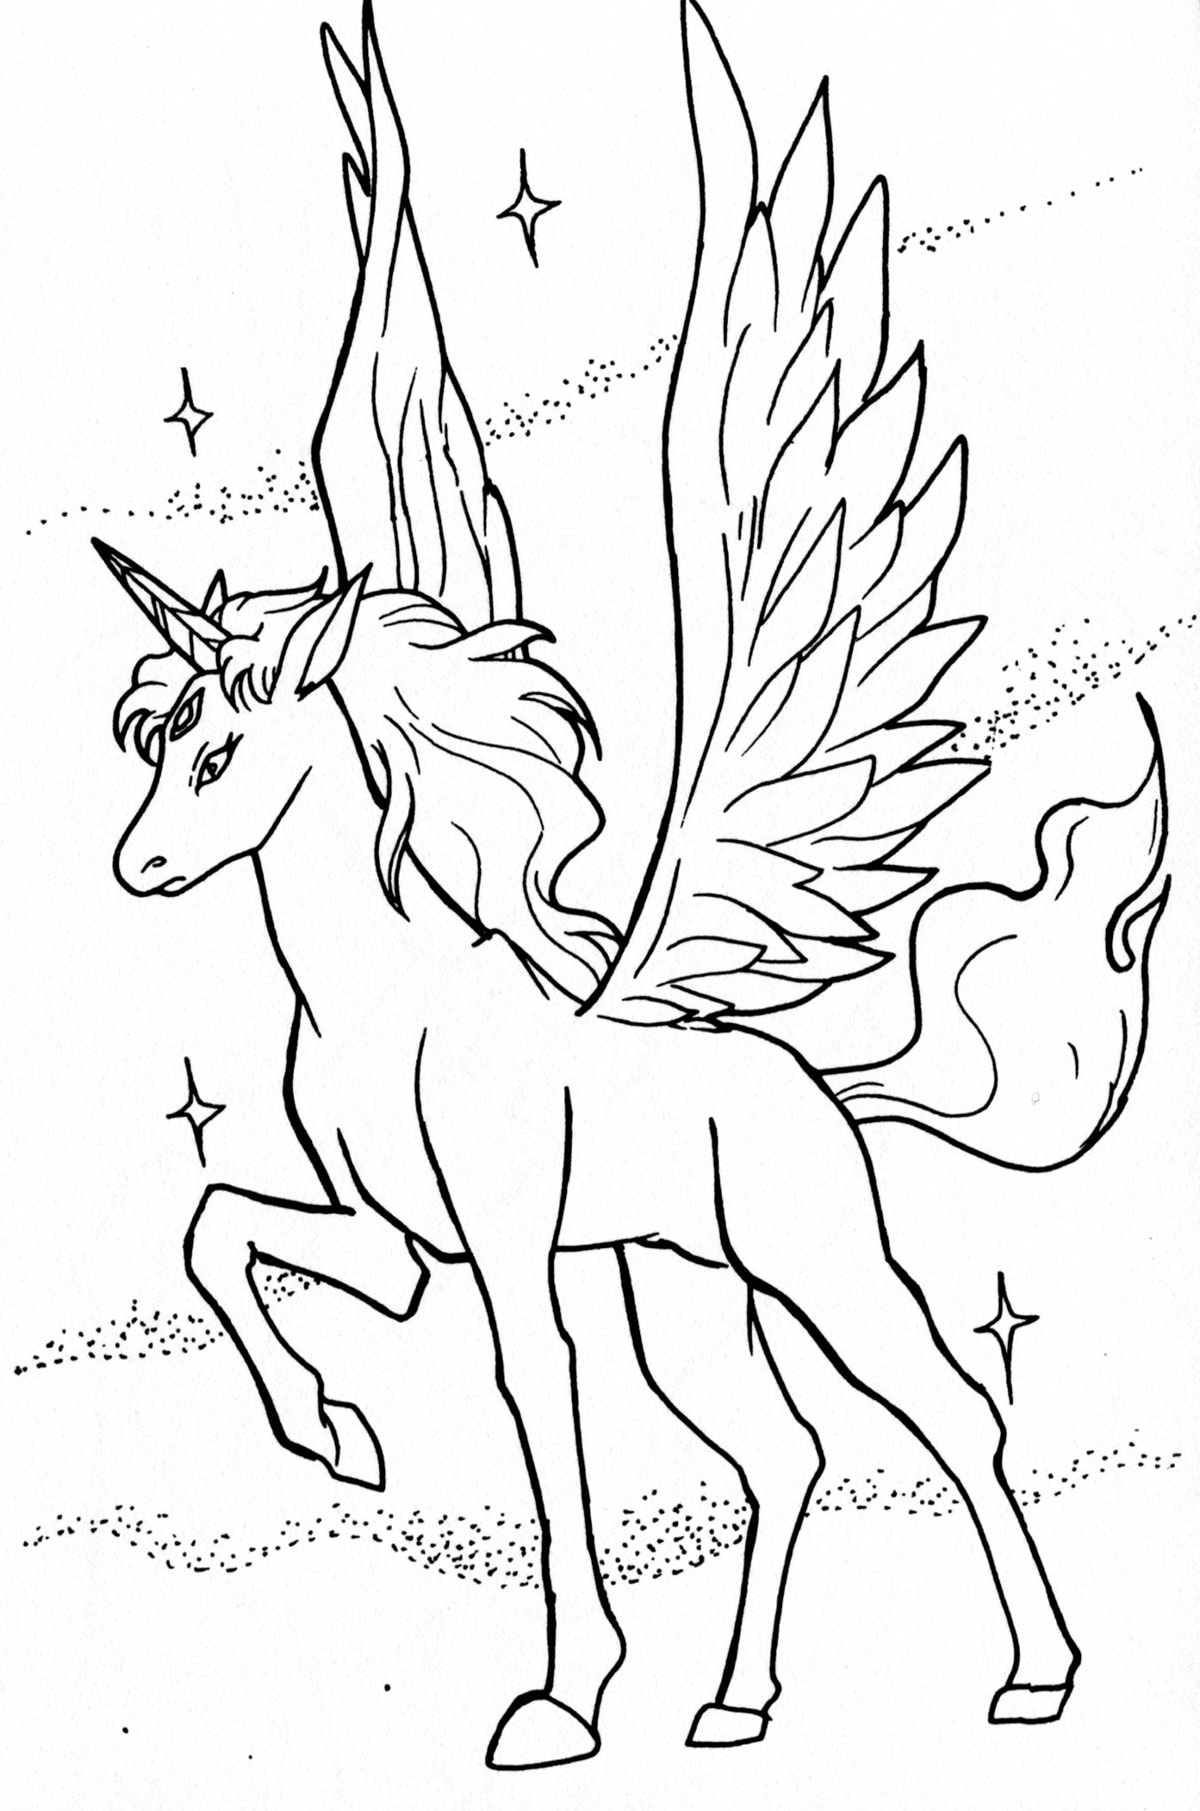 Unicorn Coloring Pages, 100 Black and White Pictures ...